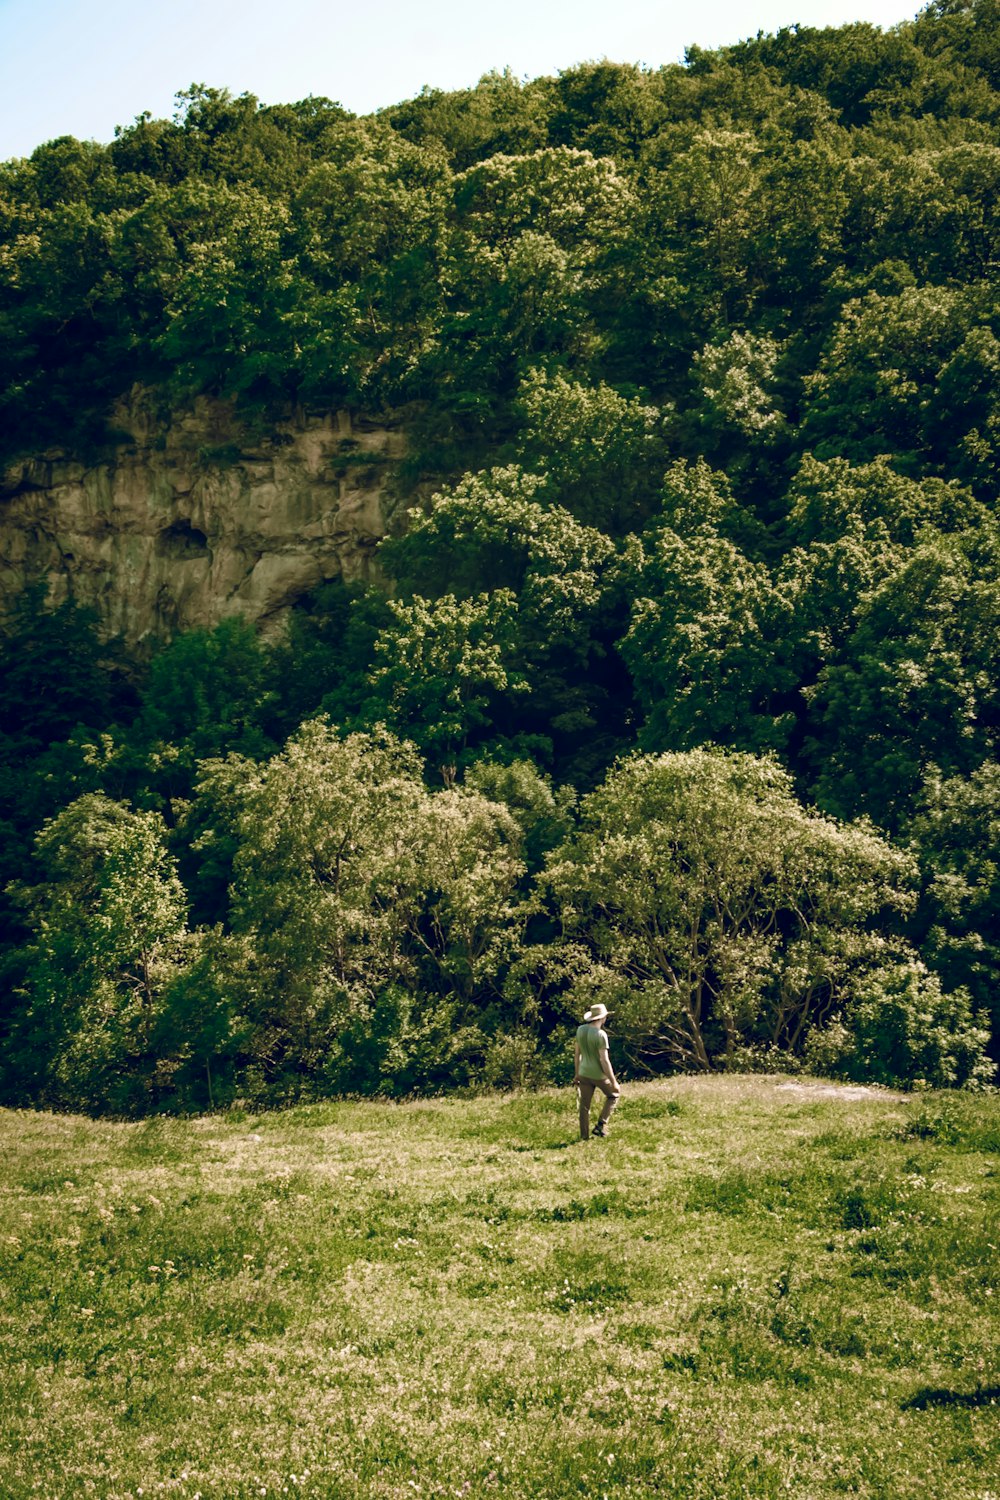 a person standing in a field with trees in the background